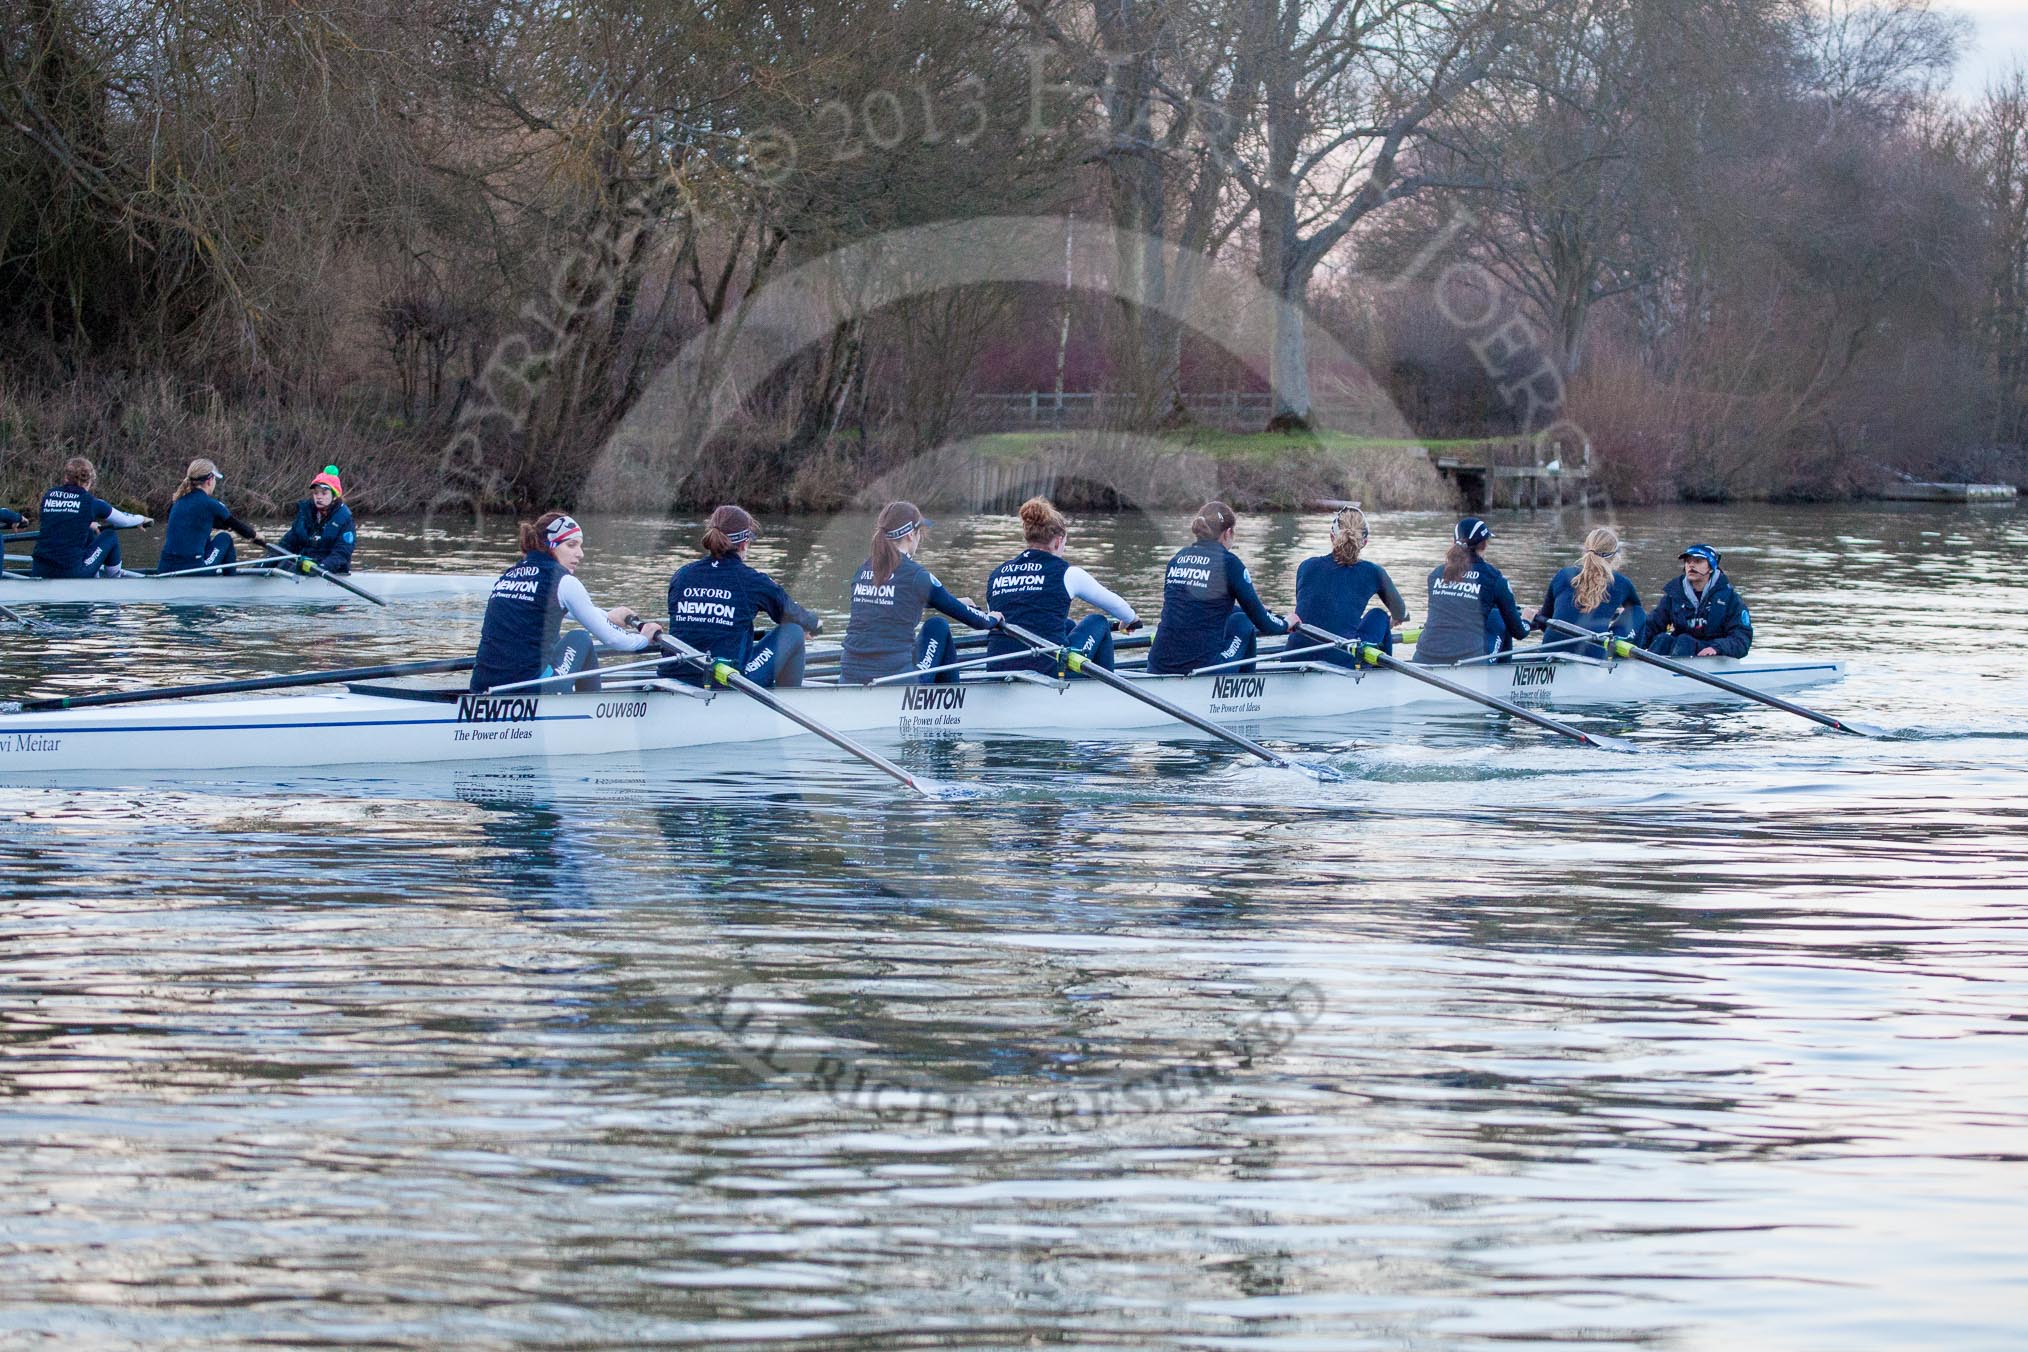 The Boat Race season 2013 - OUWBC training: OUWBC's Blue Boat and reserve boat crews warming up for a training session..
River Thames,
Wallingford,
Oxfordshire,
United Kingdom,
on 13 March 2013 at 18:00, image #197